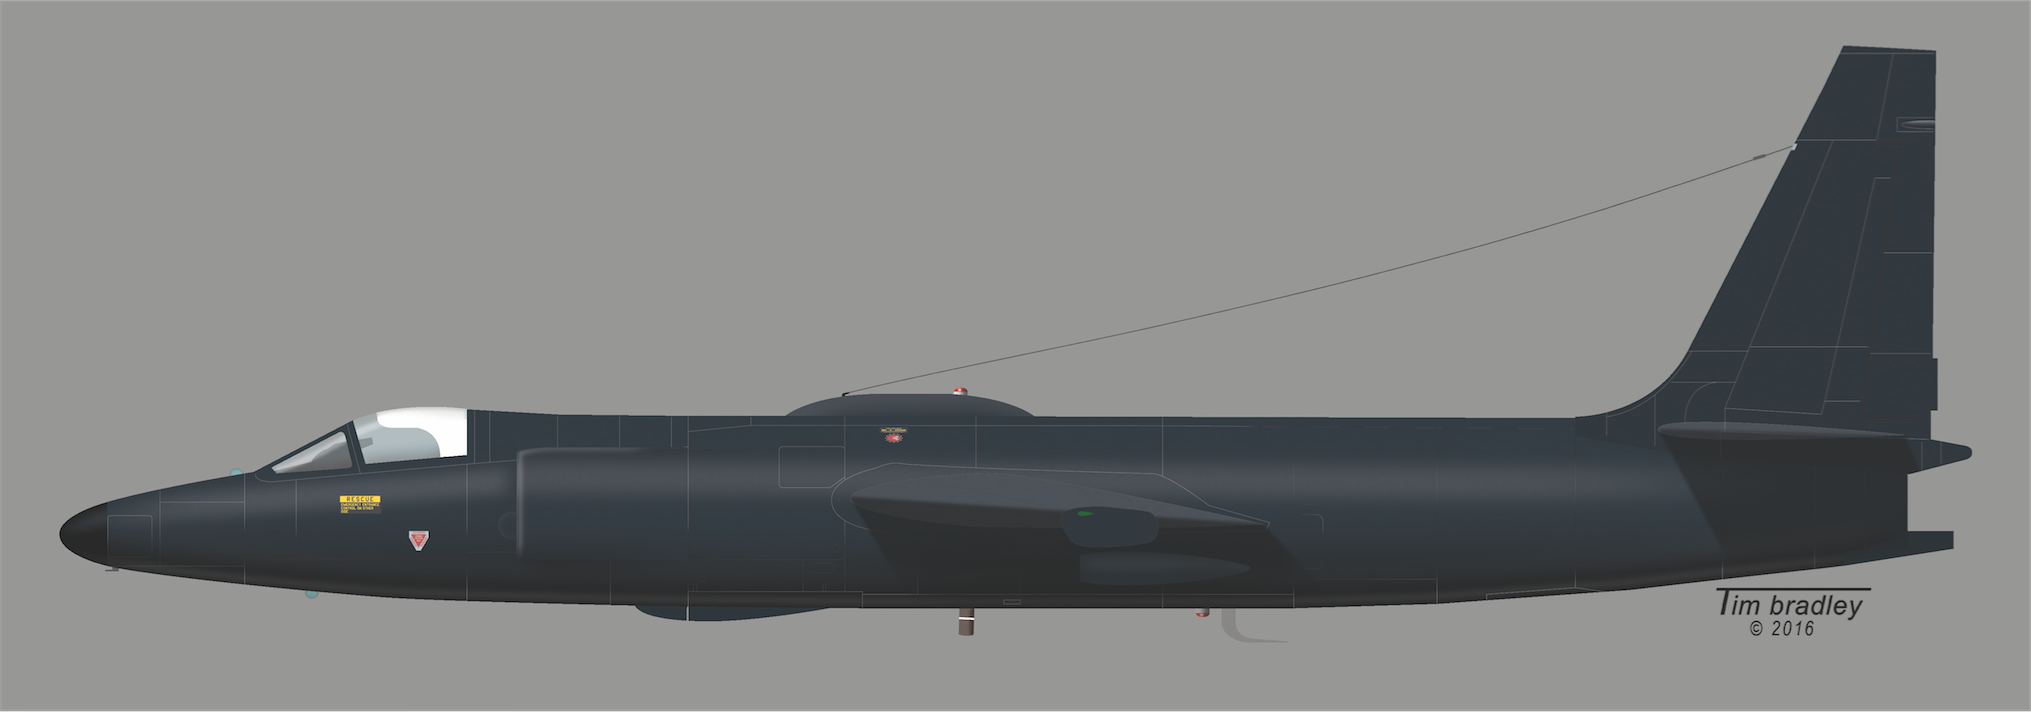 Article 360, the Central Intelligence Agency's Lockheed U-2C,56-6693, as it appeared when flown by Francis gary Powers, 1 May 1960. (Left profile illustration courtesy of Tim Bradley.( © 2016 Tim Bradley)